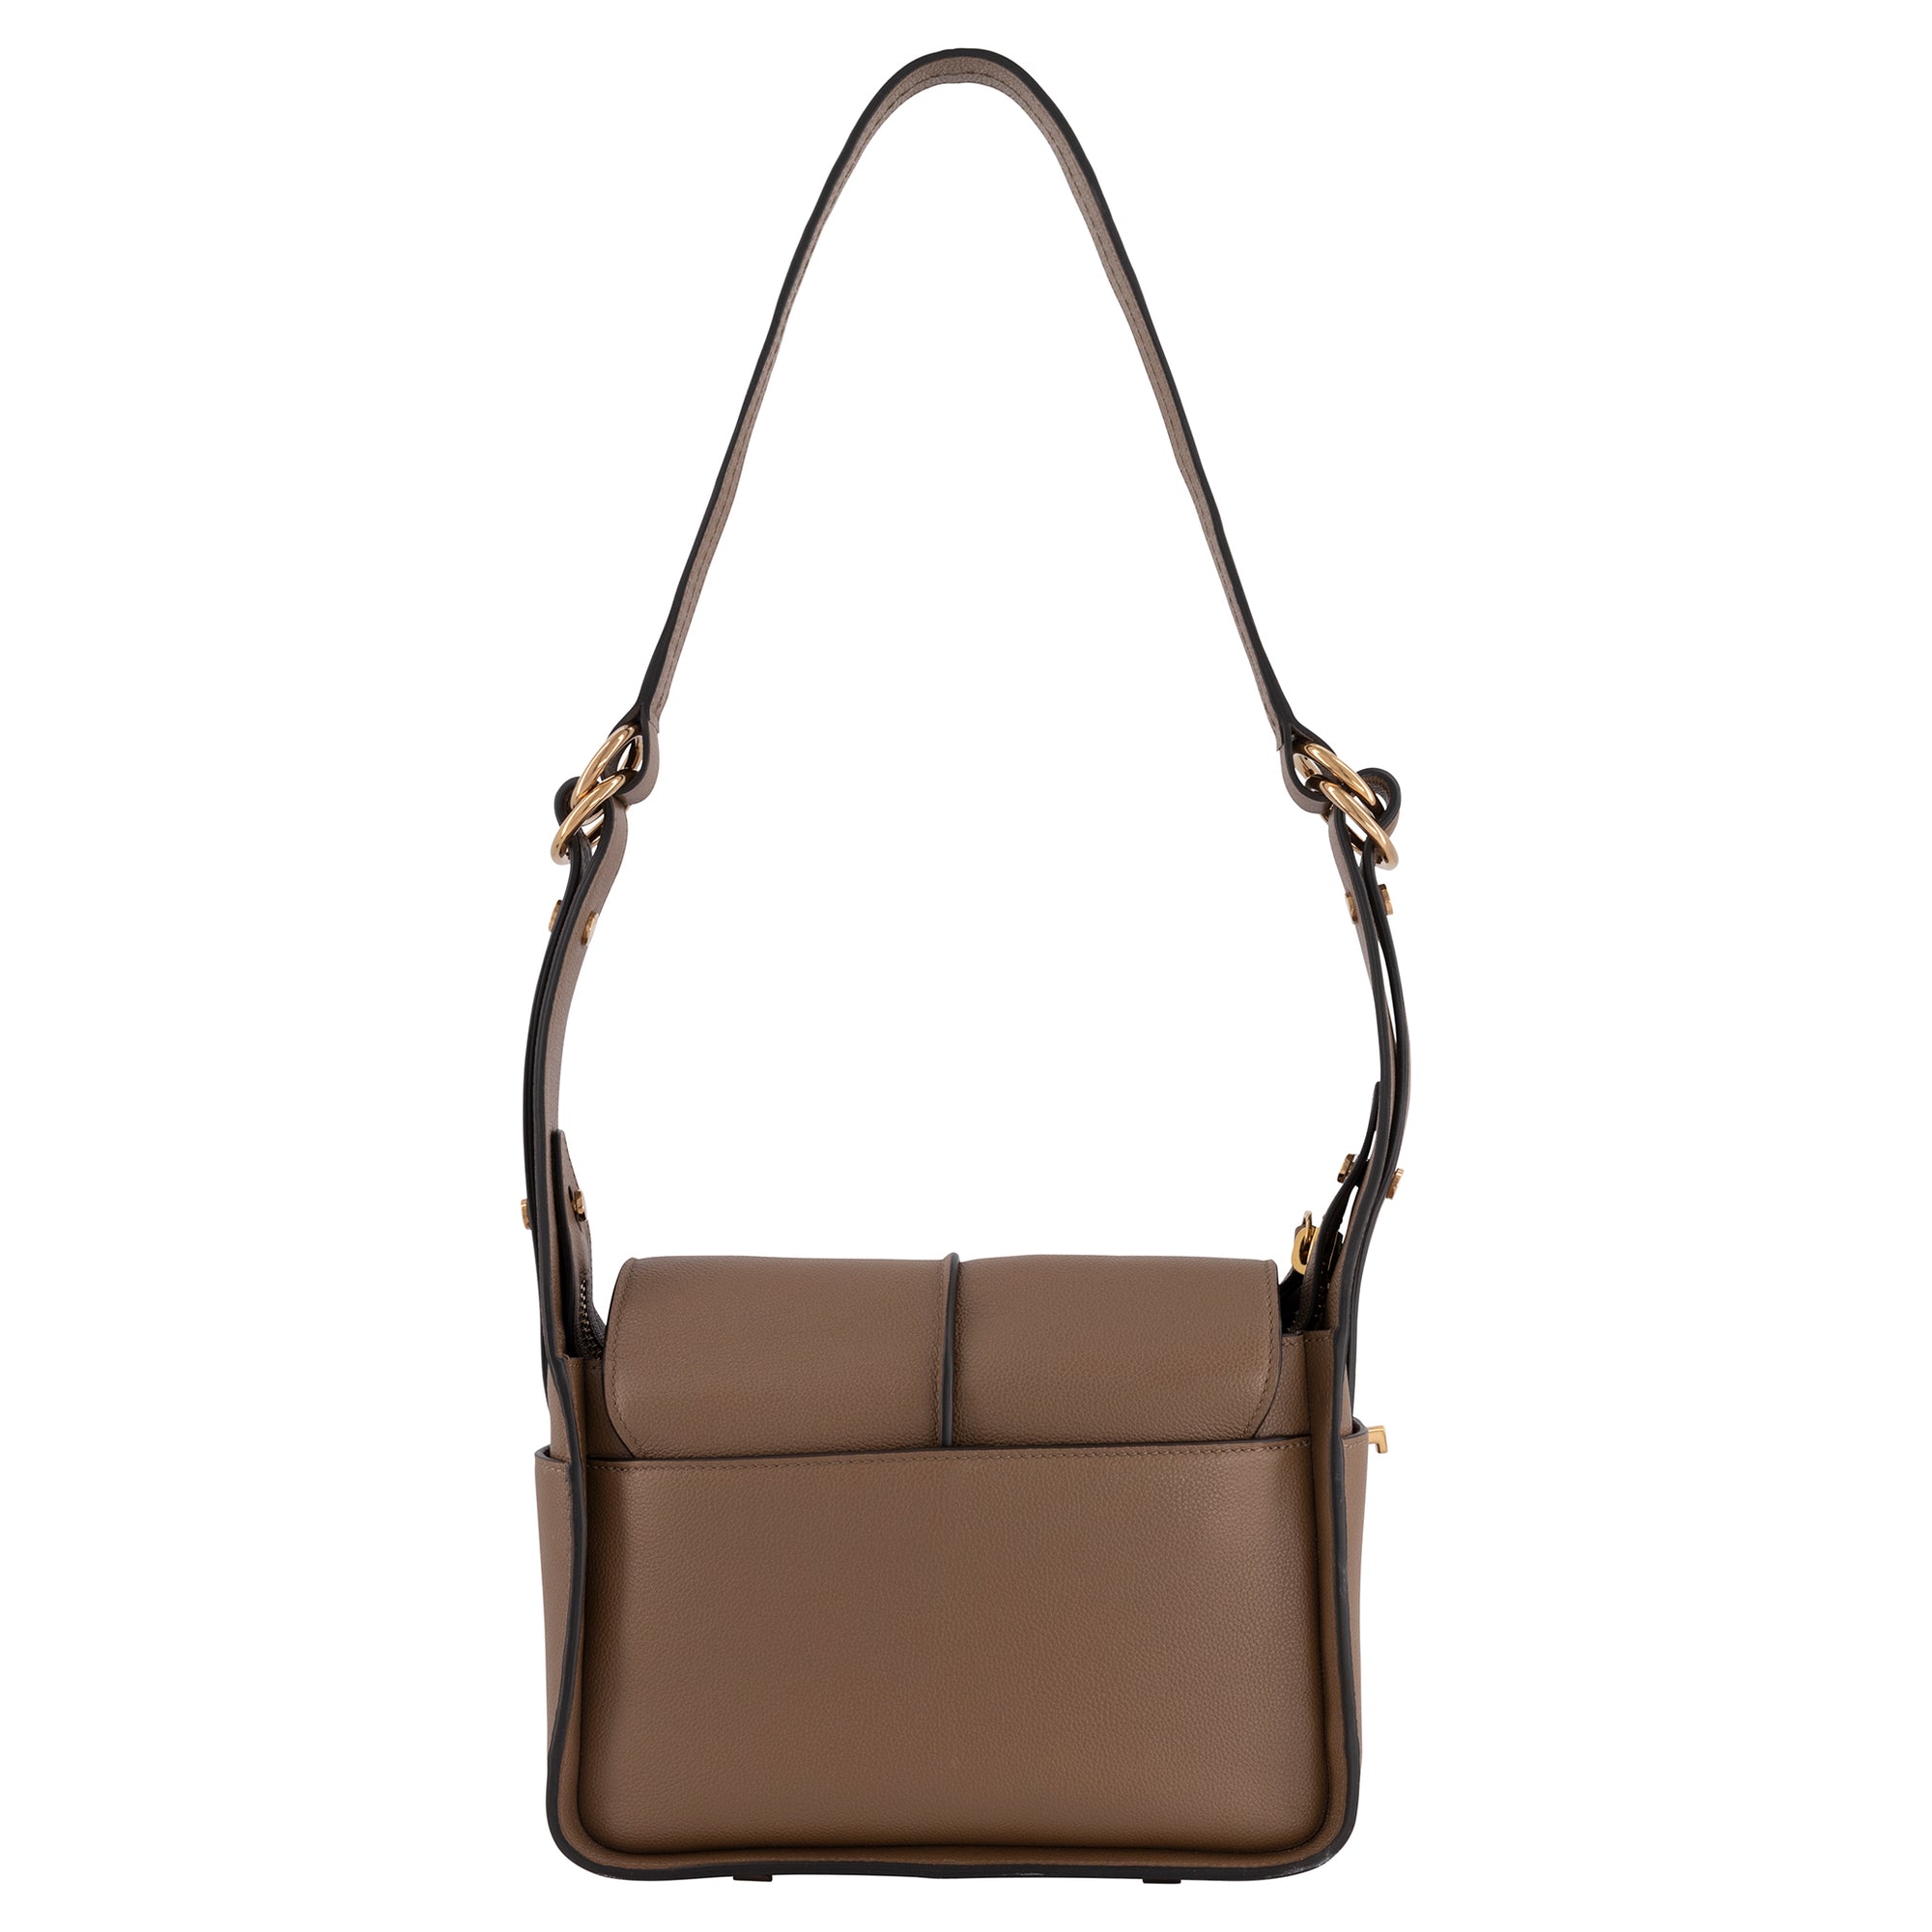 Tod's Brown bag with gold-colored hardware and shoulder strap